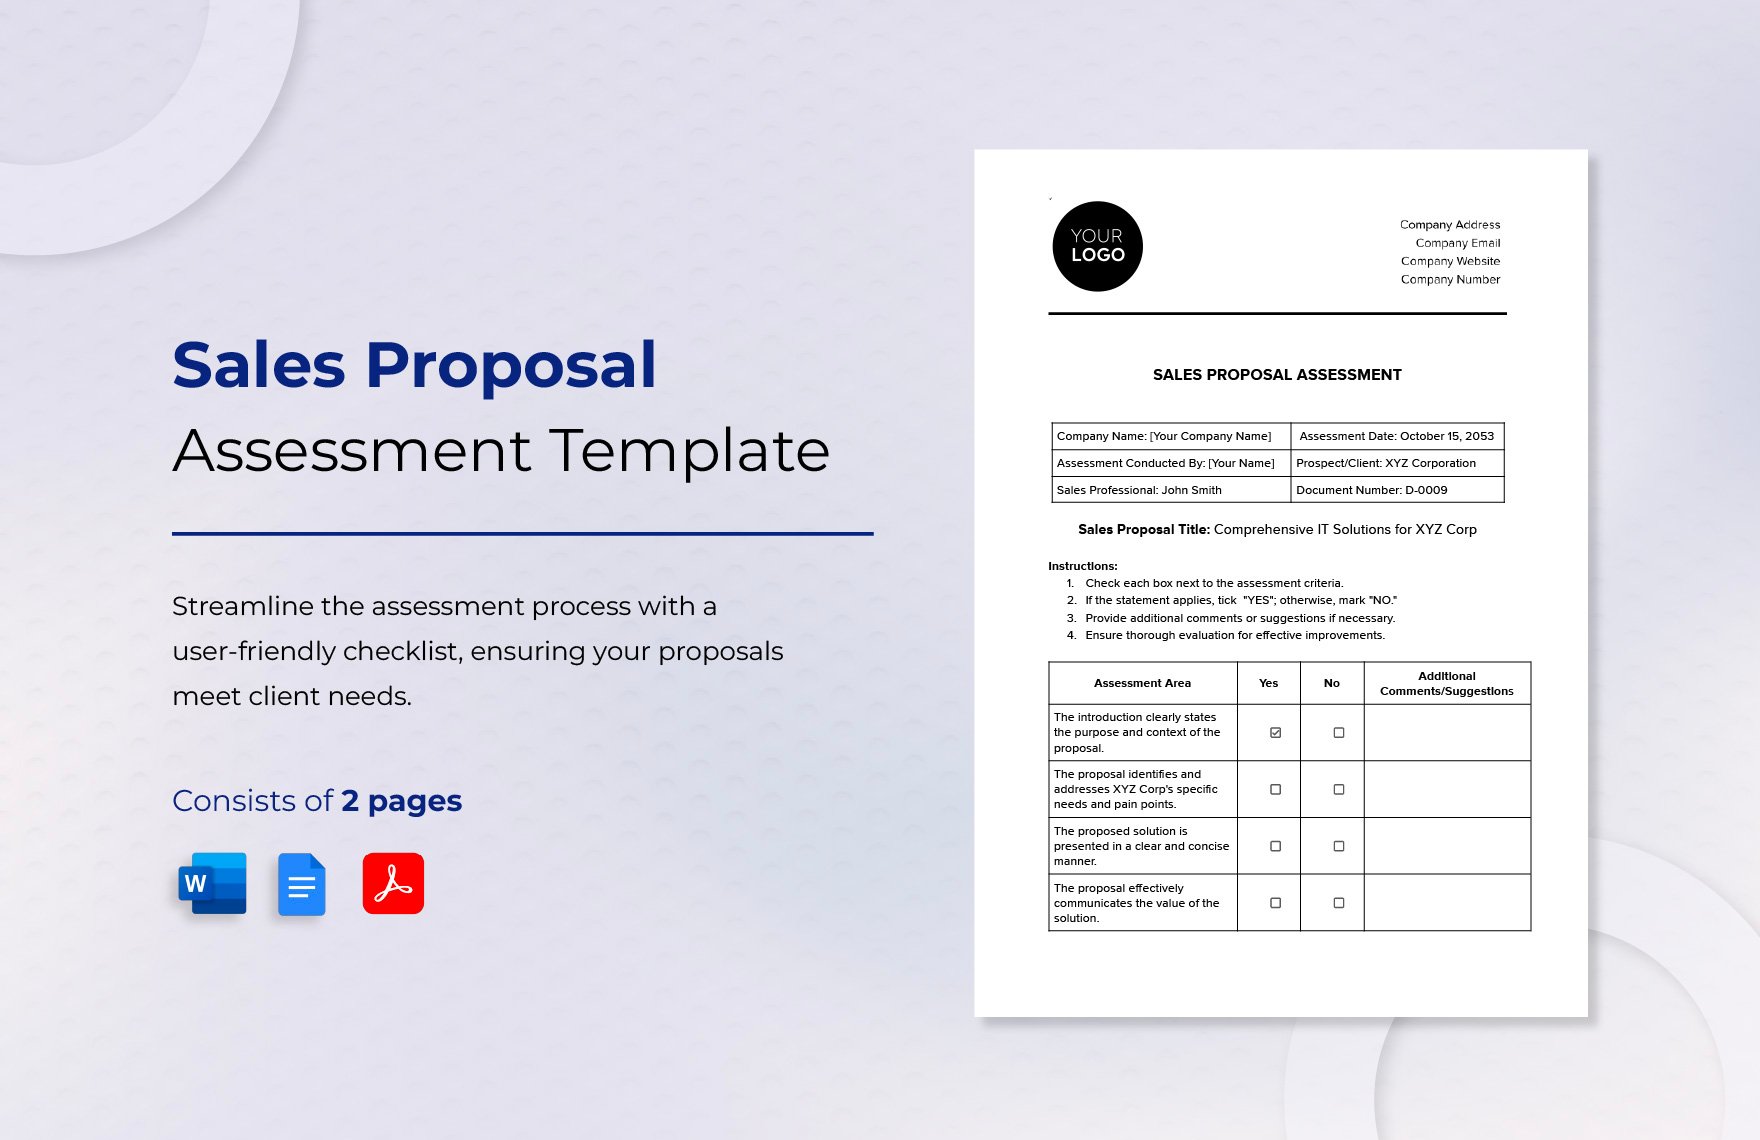 Sales Proposal Assessment Template